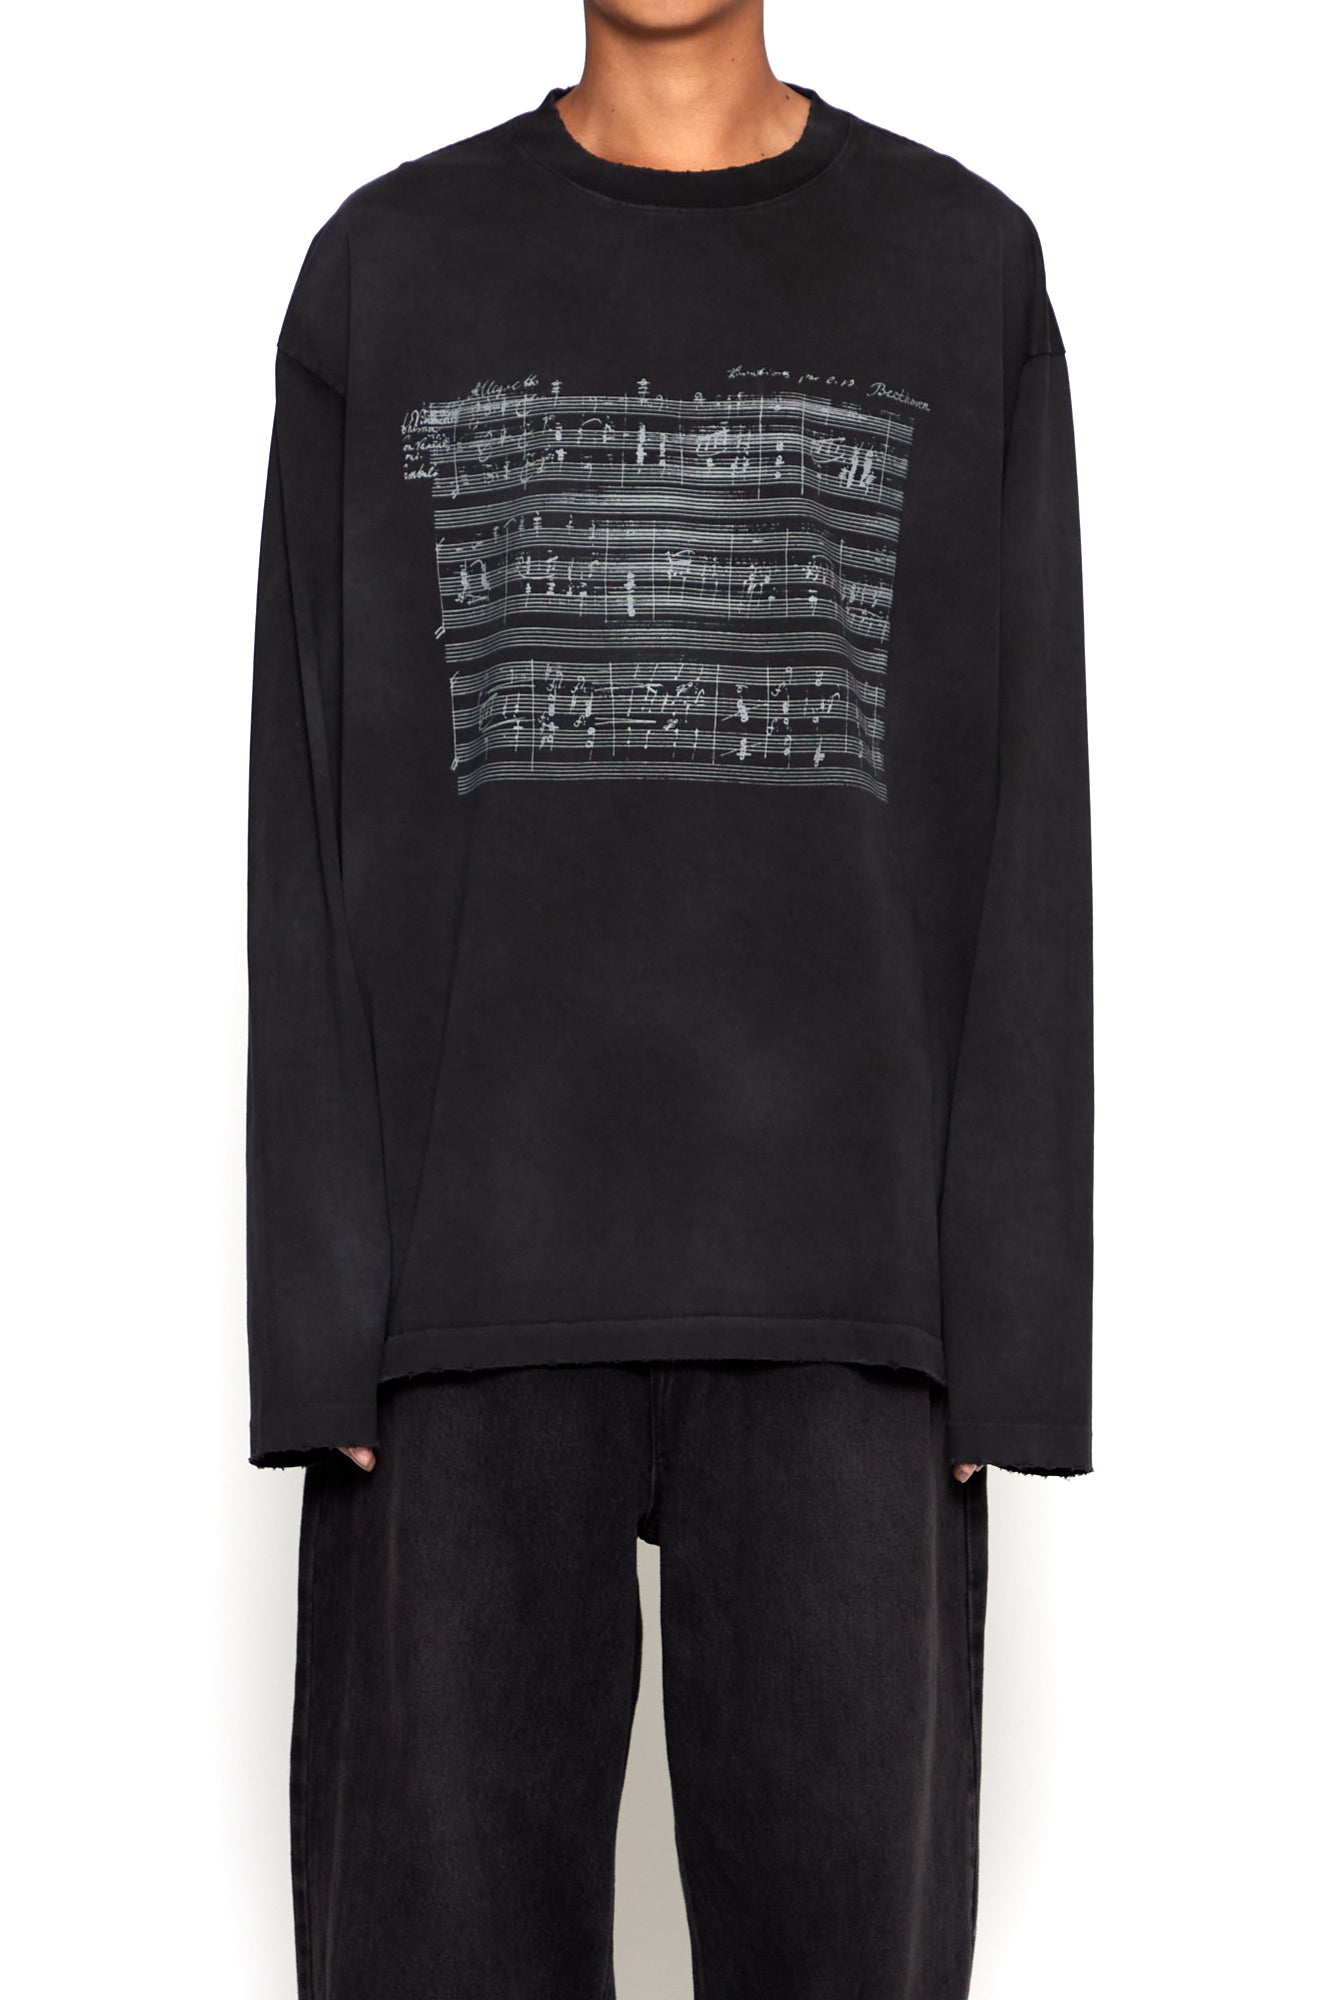 Load image into Gallery viewer, BLACK WASHED DISTRESSED AGING SHEET MUSIC PRINTED LONG SLEEVE T-SHIRT
